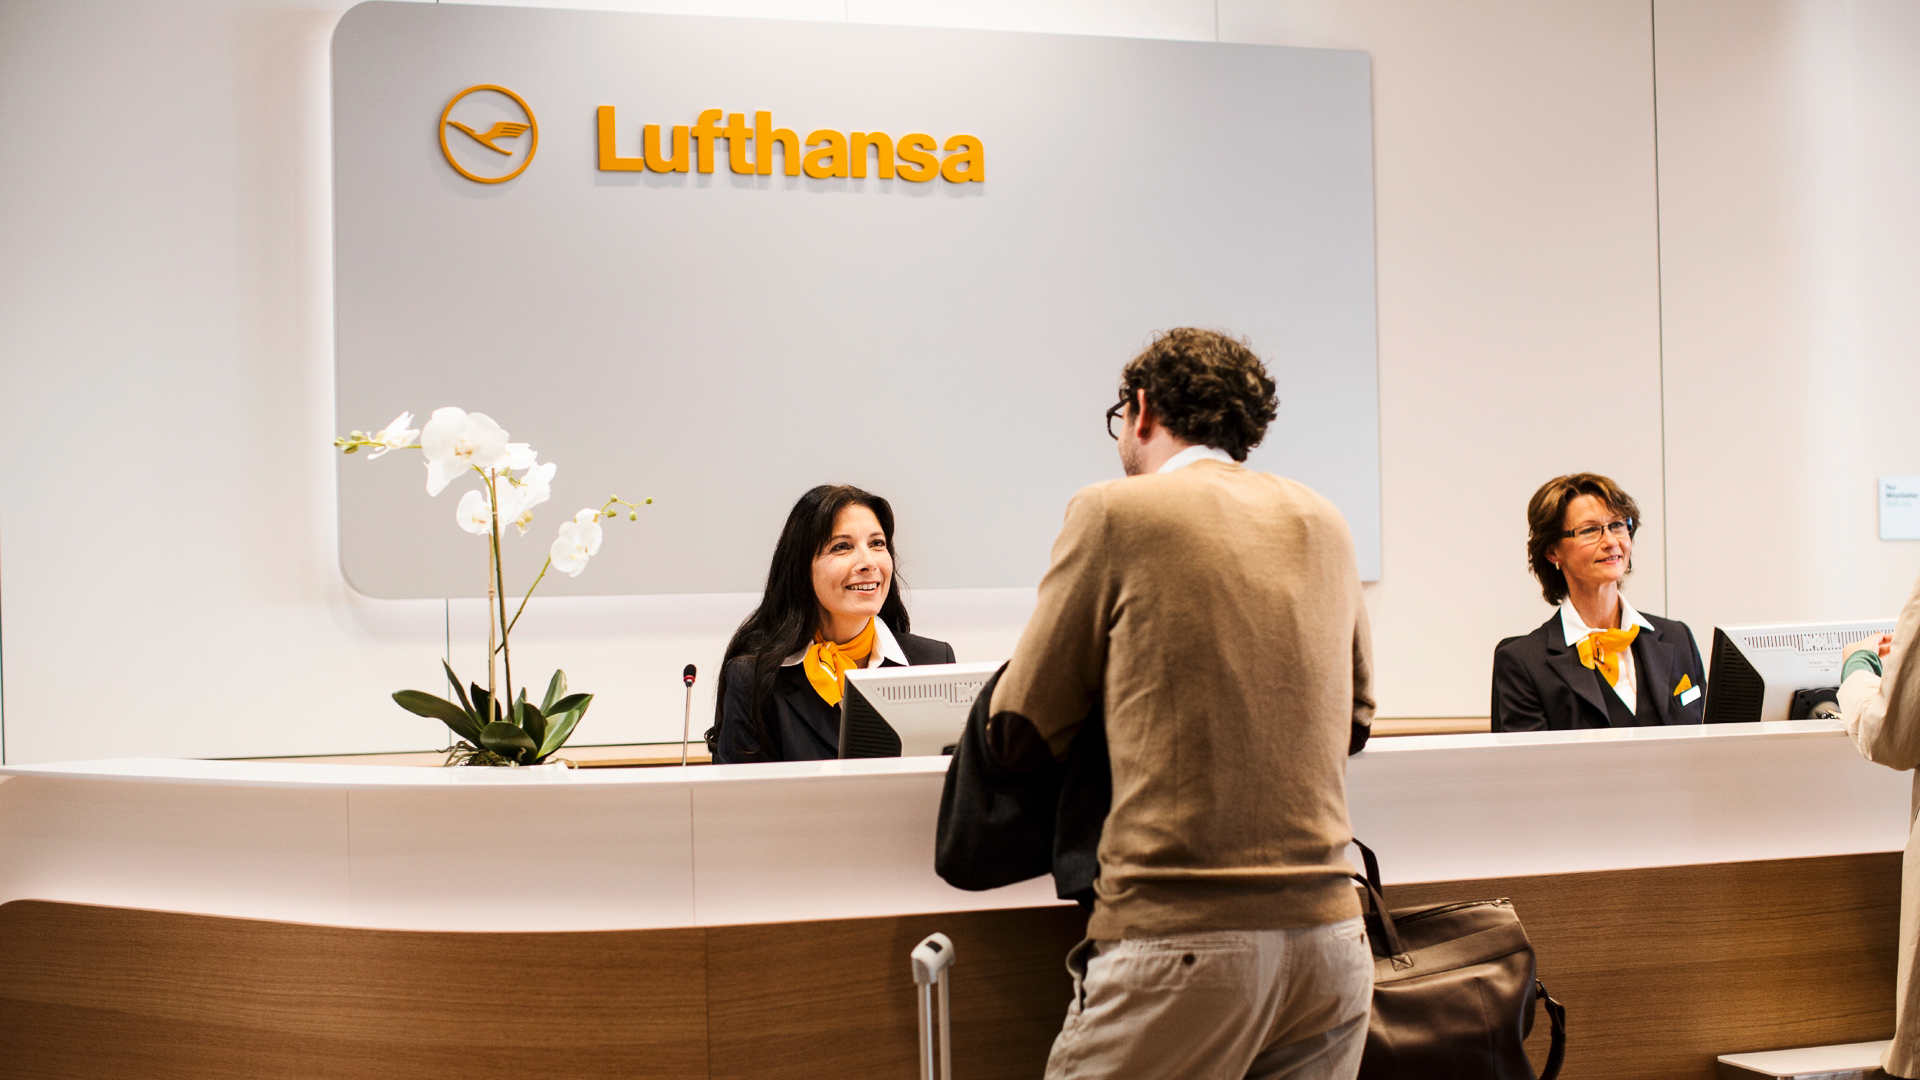 <p>Miles and More is Lufthansa's frequent flyer program, along with more than 40 other airlines. Miles expire after 36 months unless you qualify for a higher tier of benefits, in which case the miles never expire. You qualify for extra perks, such as faster mileage accumulation, vouchers to fly in a higher class, booking guarantees, lounge access, and free baggage, as you reach higher tiers. As a member of the Star Alliance, you can use your miles for flights on 28 airline partners, including United Airlines. You can also redeem points for hotels, rental cars and cruises with Lufthansa's partners, or get gift cards or donate to charity.</p> <p><strong><em>I'm a Financial Planning Expert: <a href="https://www.gobankingrates.com/money/financial-planning/expert-advice-things-you-should-never-spend-money-on-if-you-want-to-be-rich/?utm_term=related_link_6&utm_campaign=470000&utm_source=msn.com&utm_content=9&utm_medium=rss" rel="">Here Are 5 Things You Should Never Spend Money on If You Want To Be Rich</a></em></strong></p>